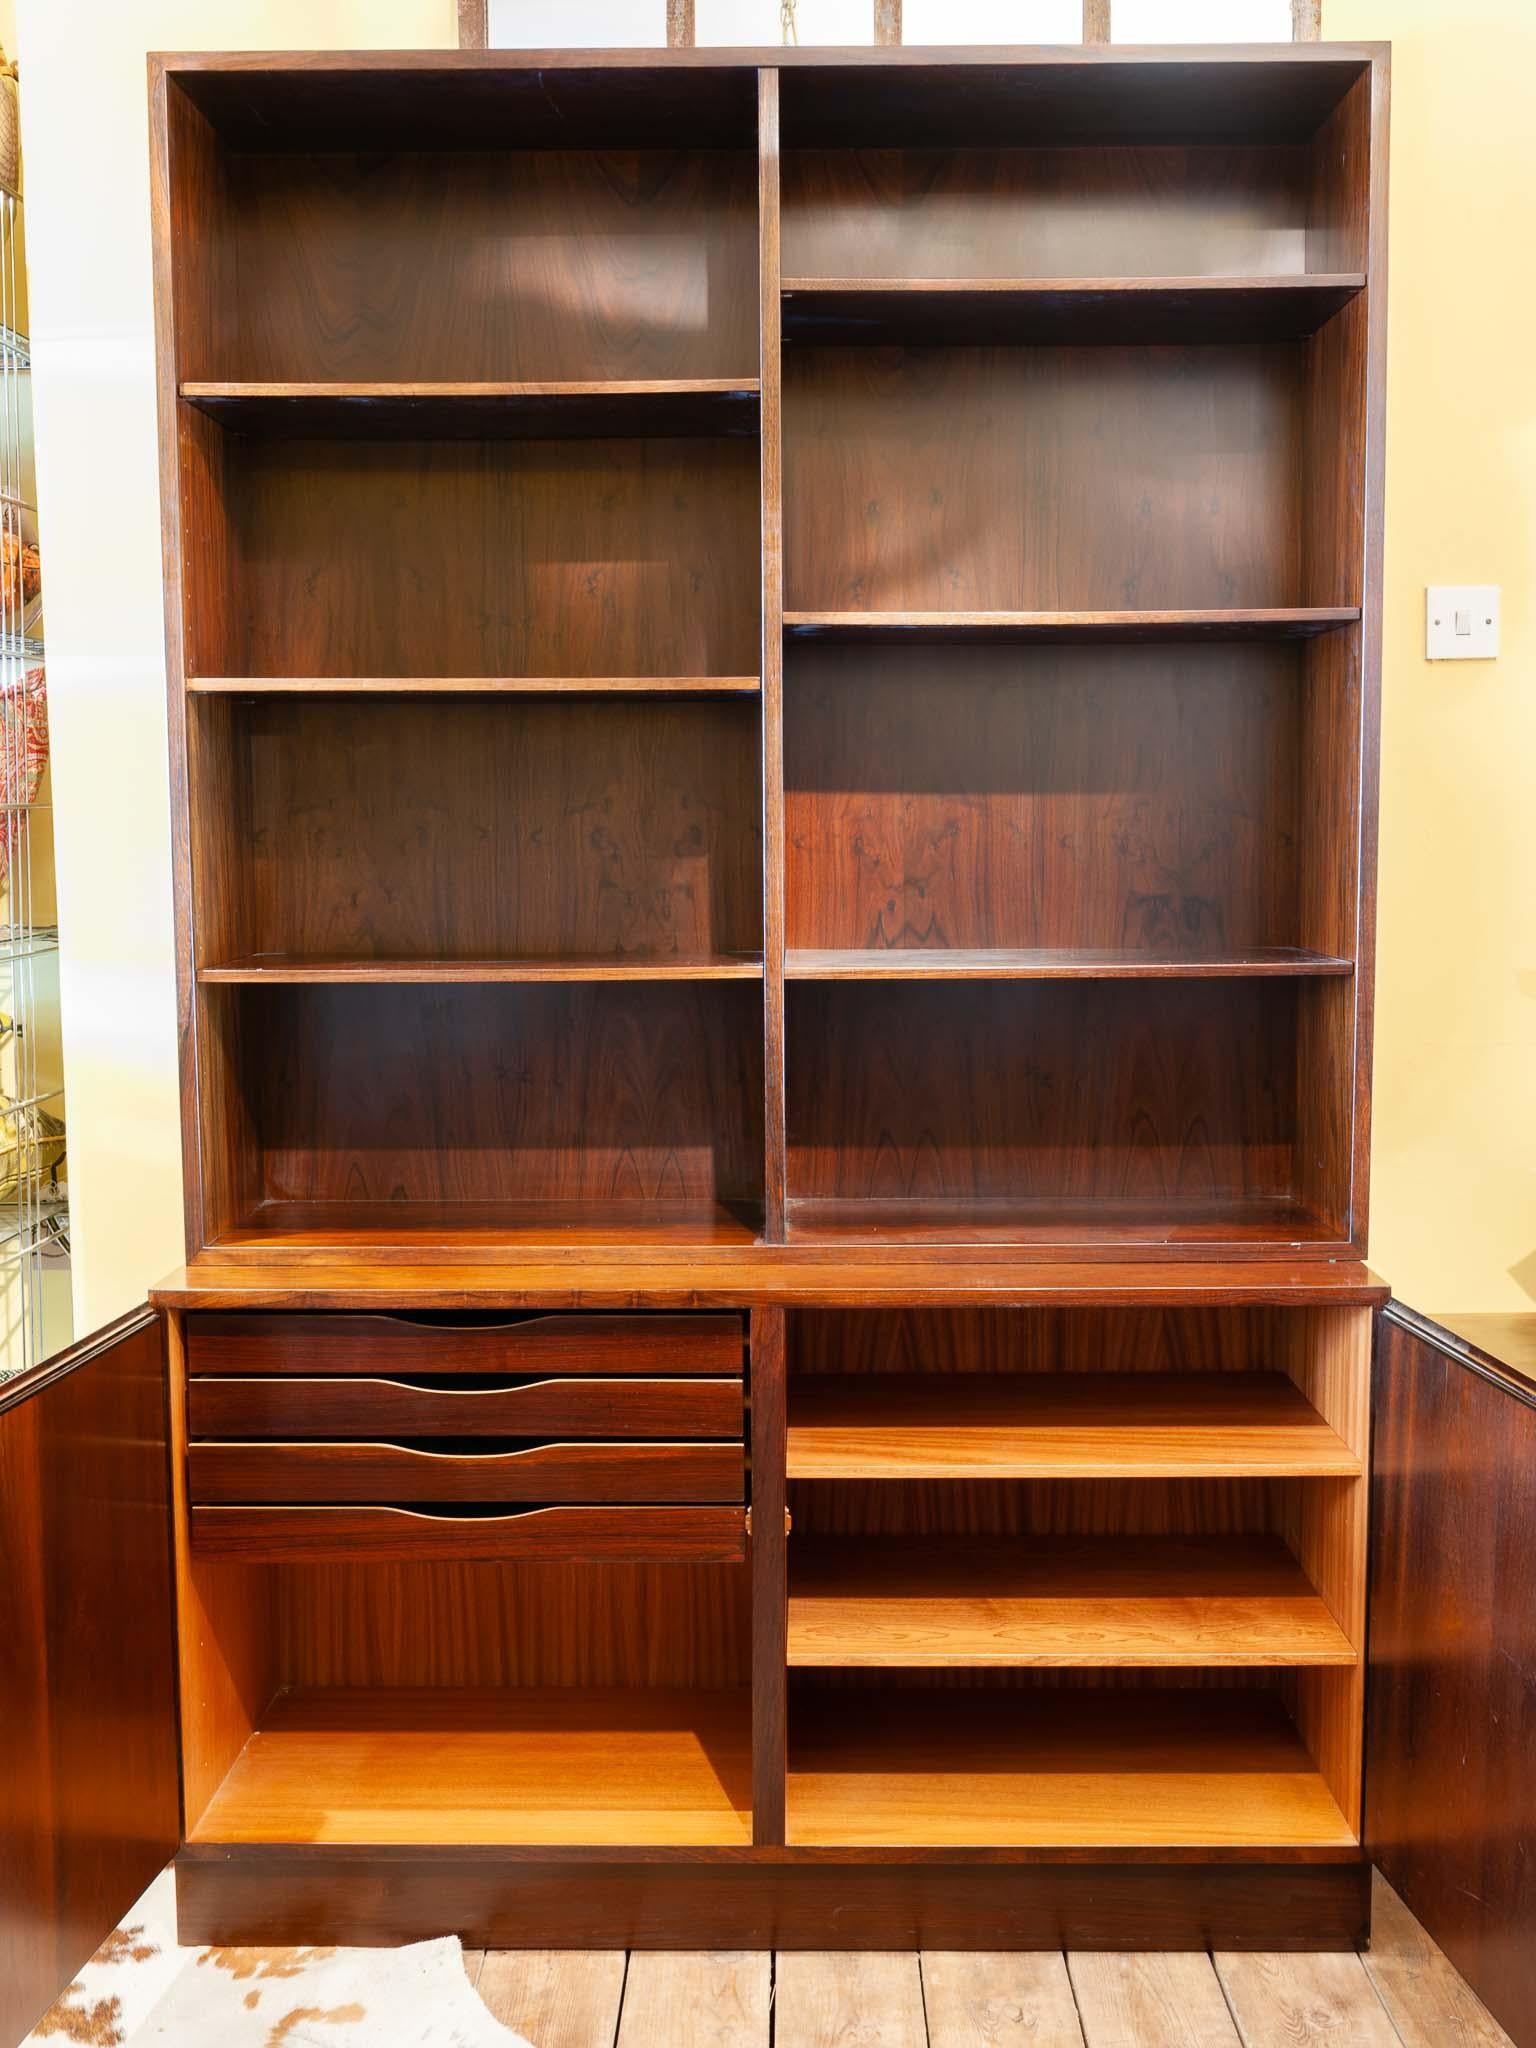 Vintage 1960s rosewood veneer bookshelf/shelving unit with two storage cupboards manufactured in Denmark by Omann Jun. Model No.4. The shelving unit features six adjustable shelves (with two spares) that sit on a double storage unit below. The